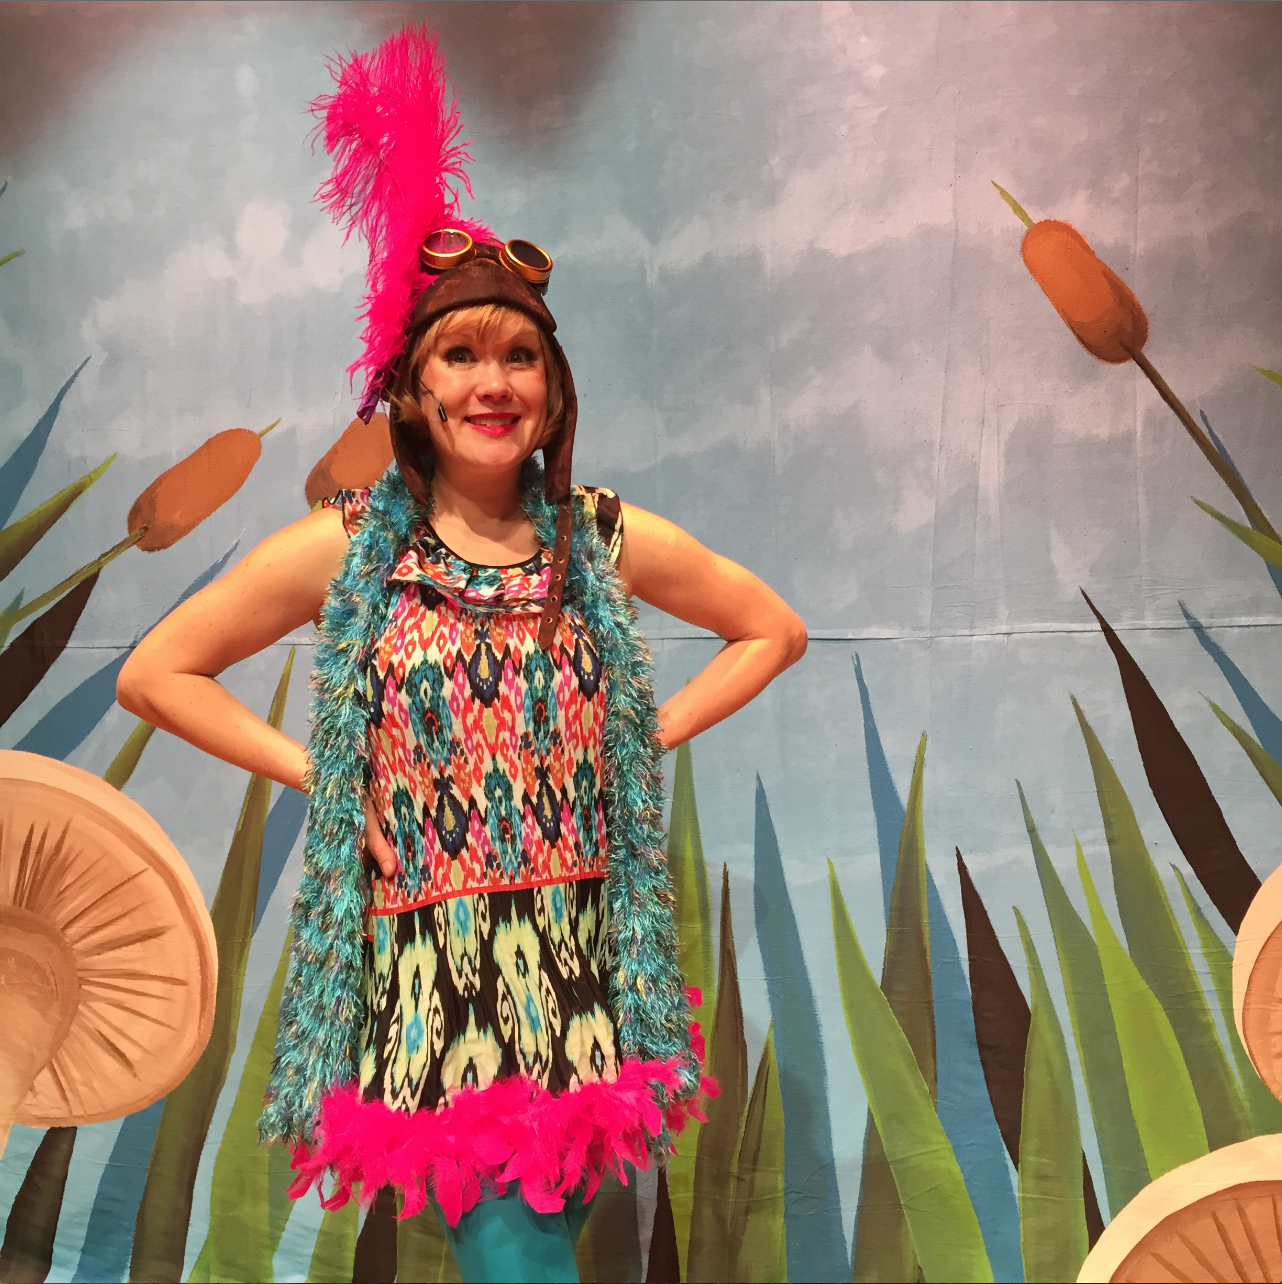 Lena as Bird in Frog and Toad